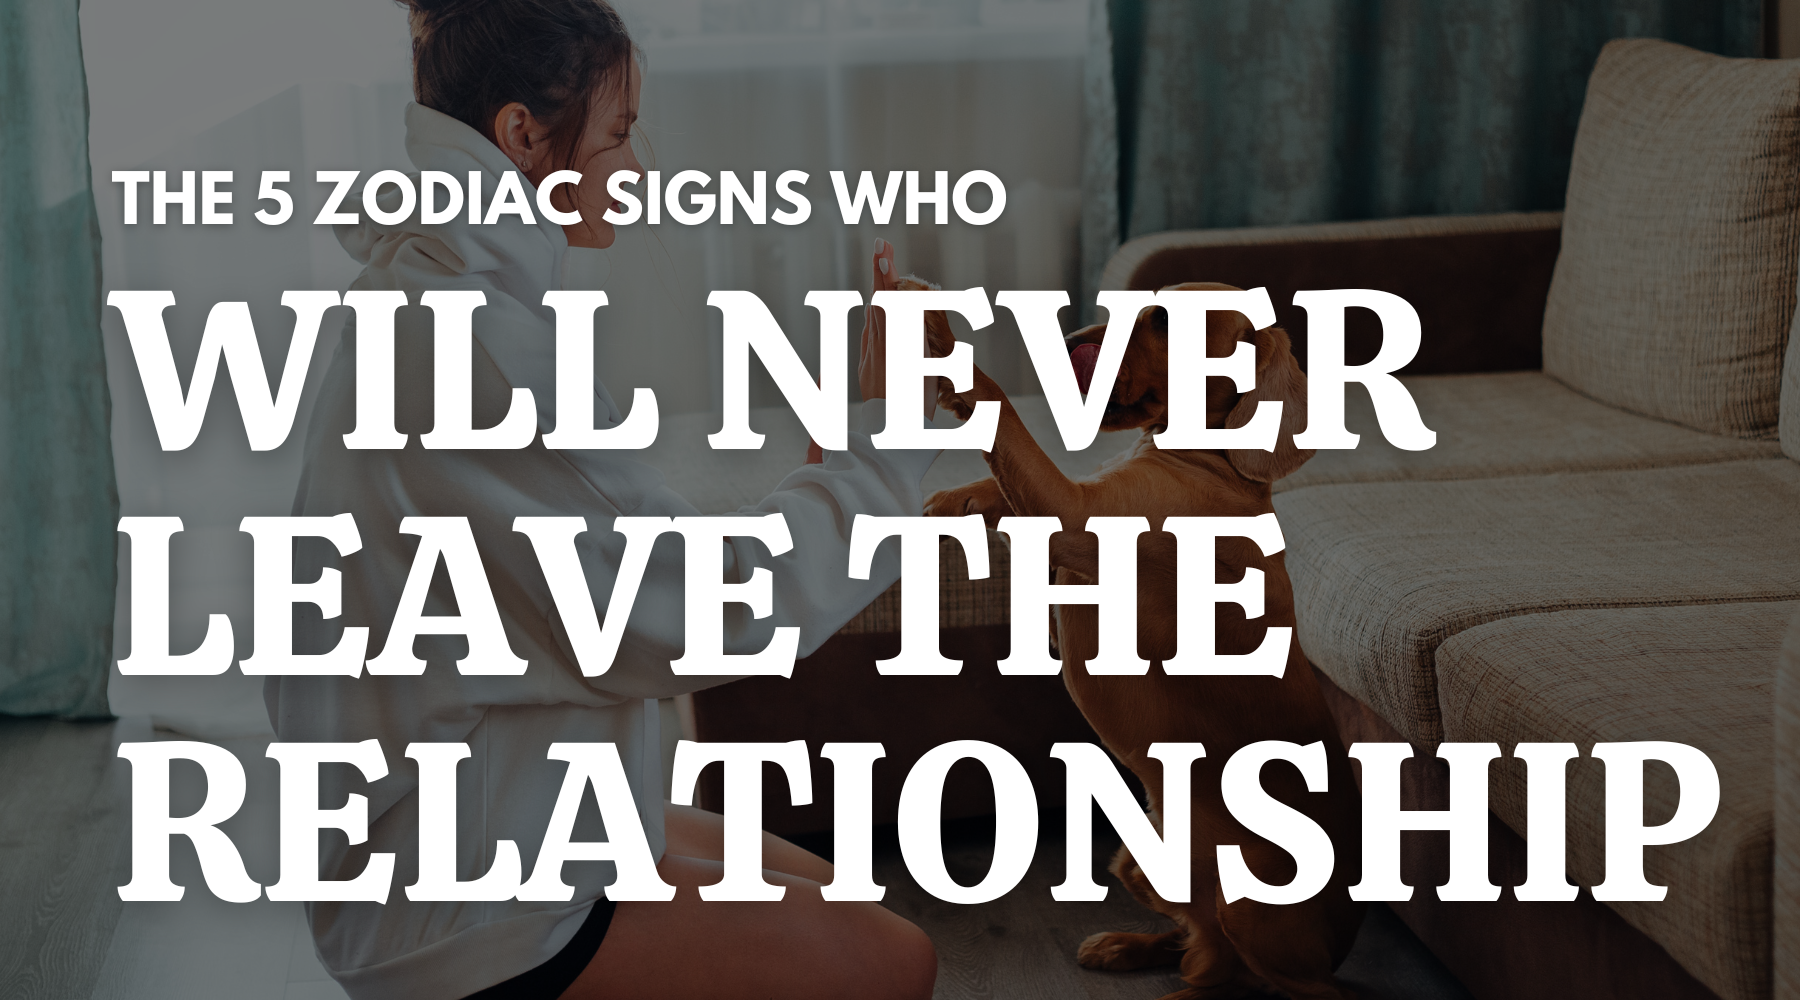 The 5 zodiac signs who will never leave the relationship